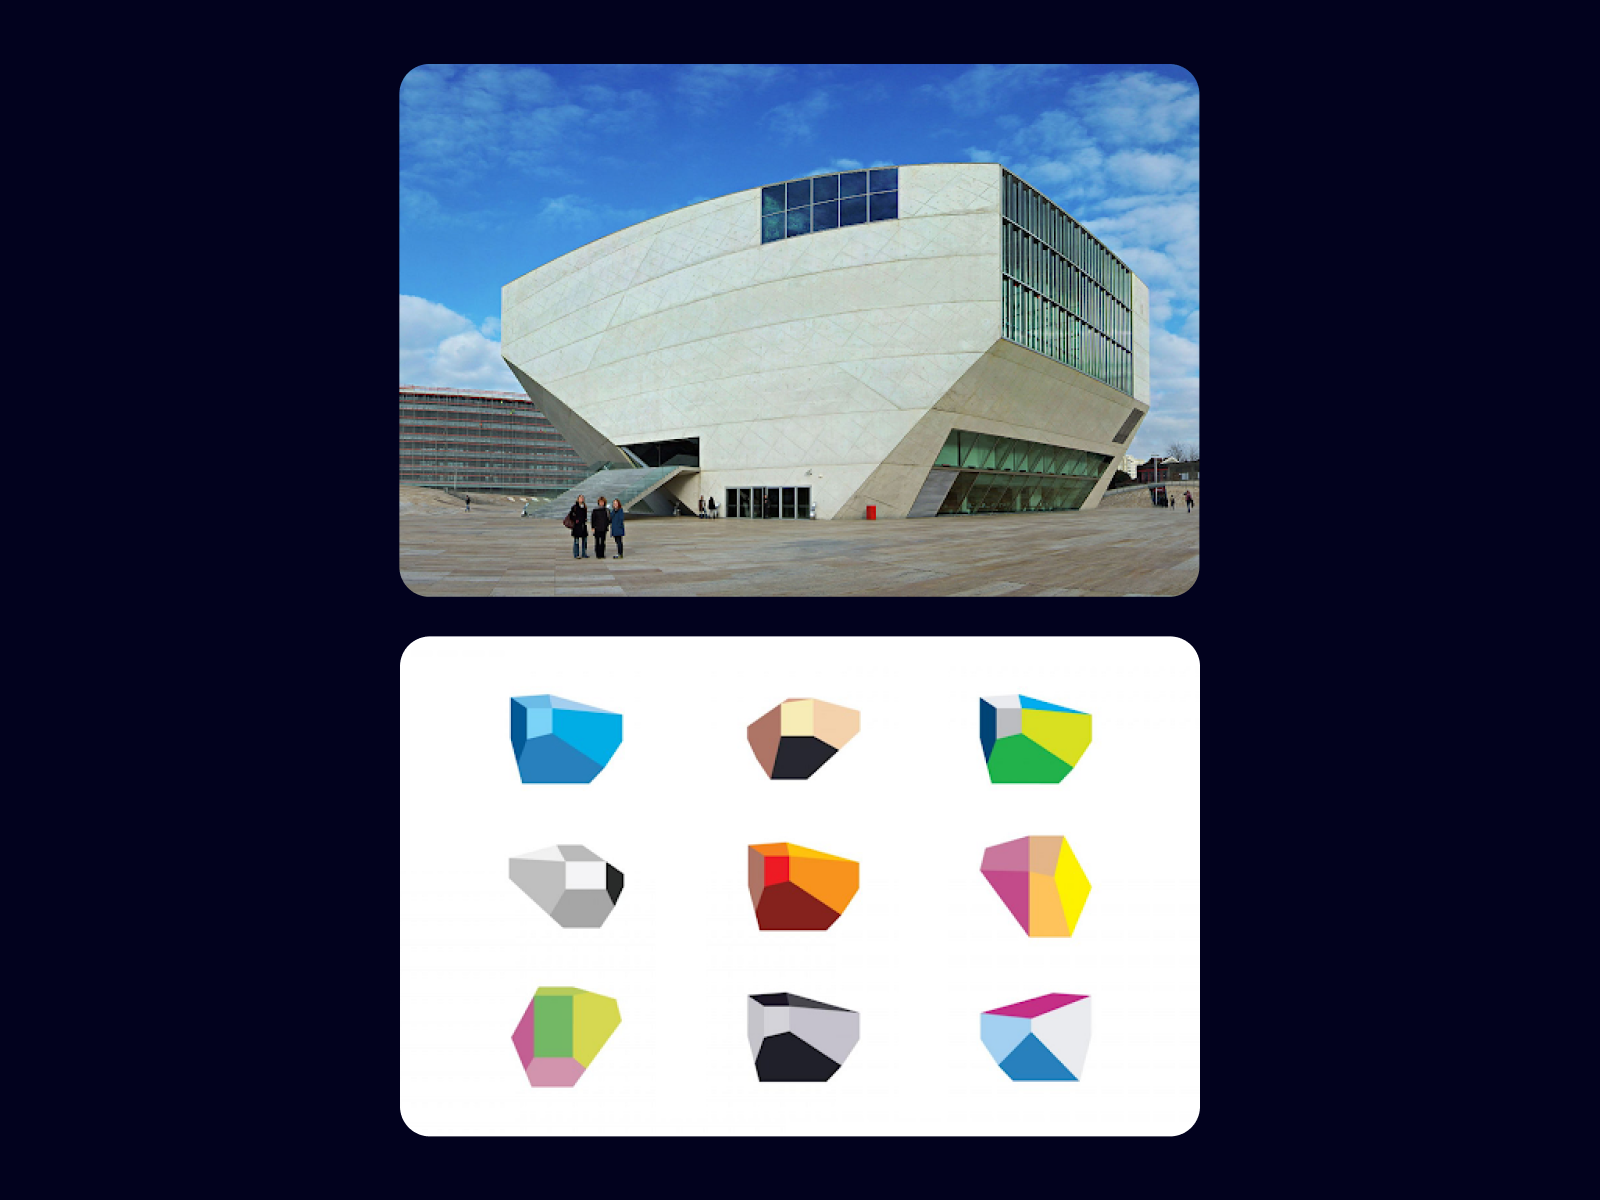 The dynamic logo for Casa Da Musica inspired by the shape of the building